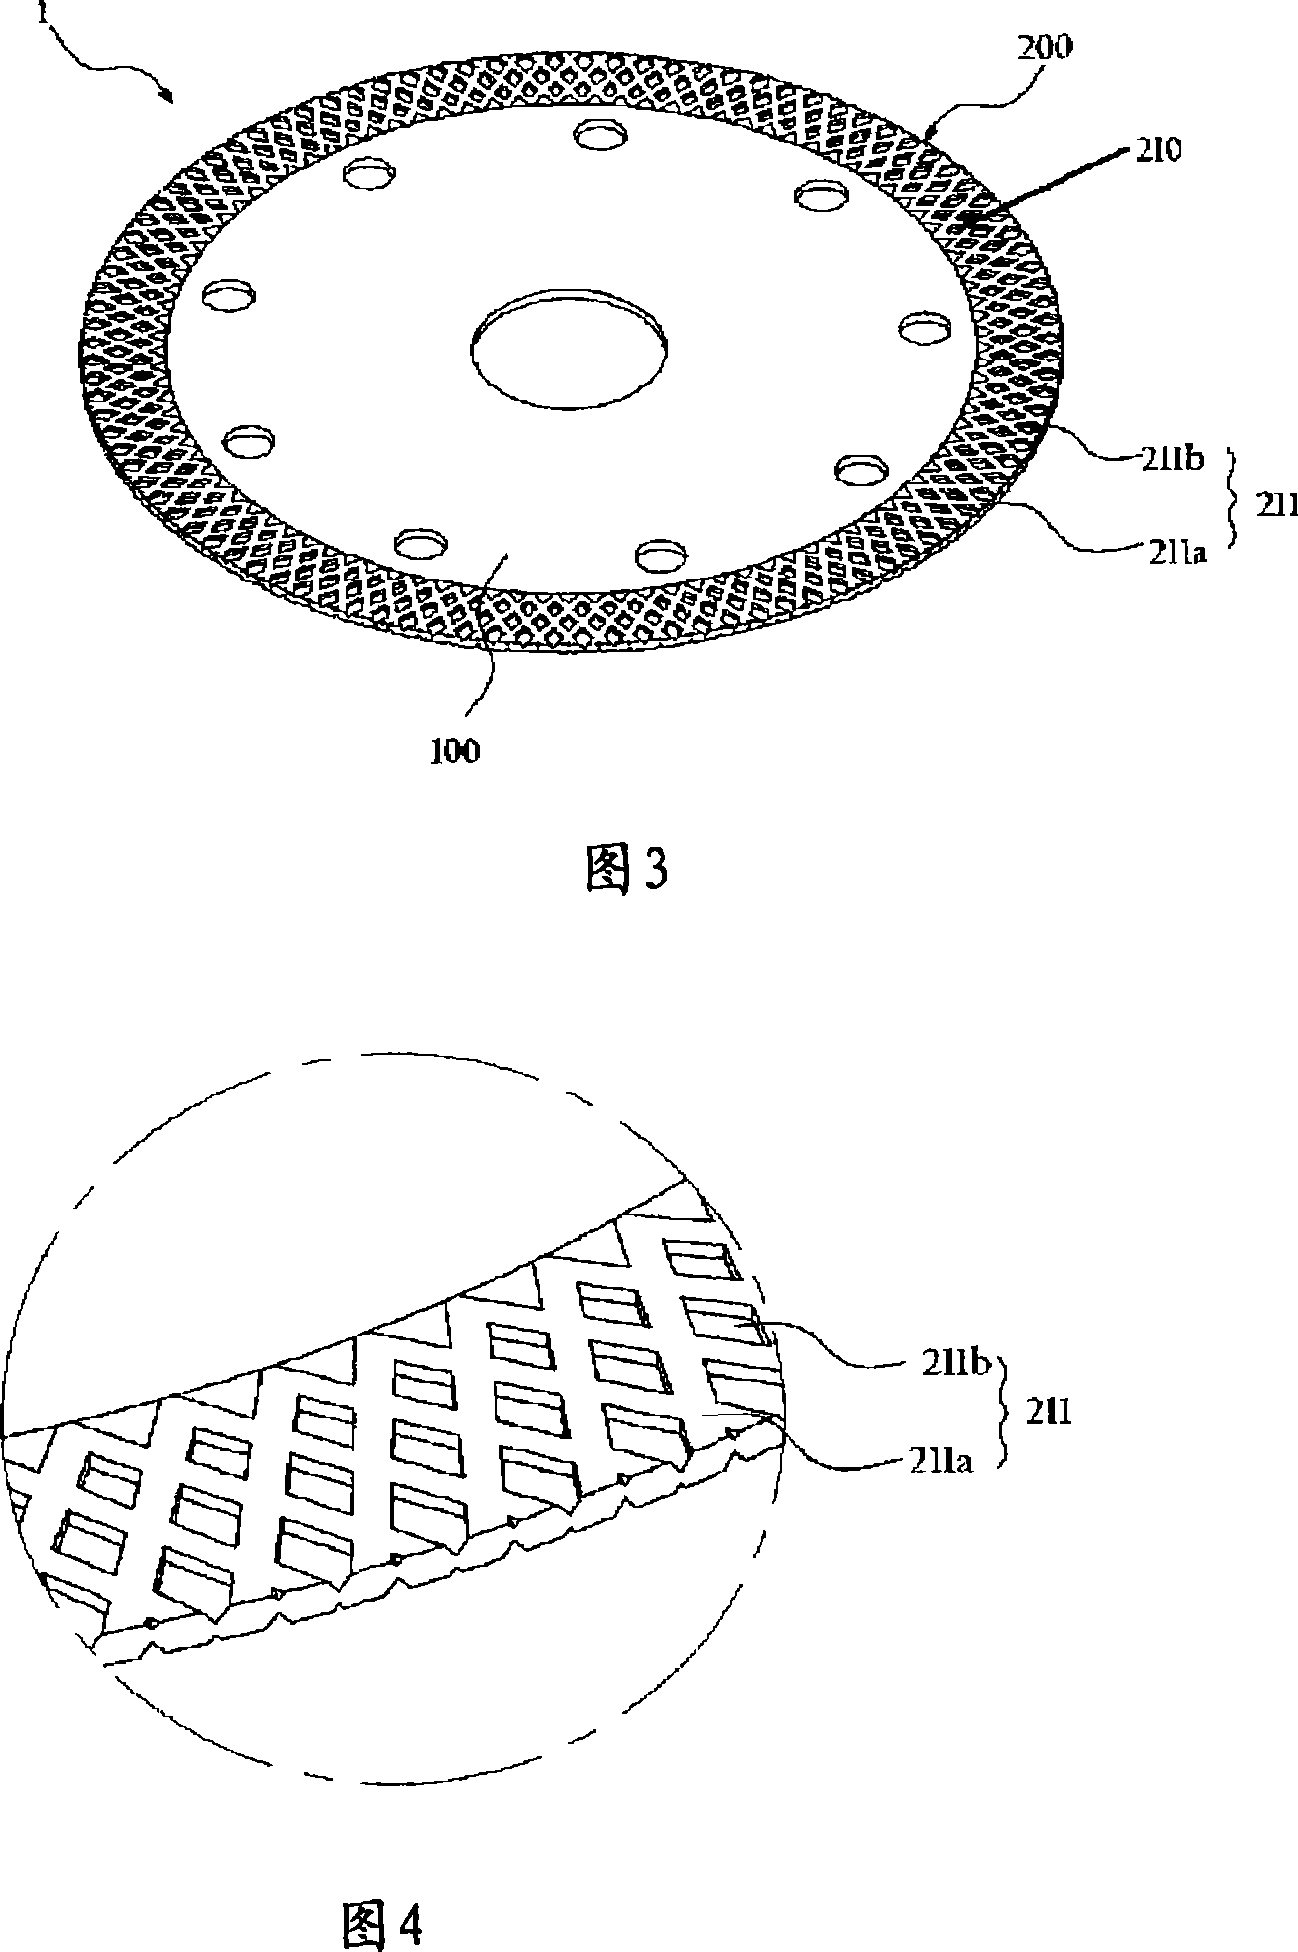 Structure of cutting tip and saw blade including the structure